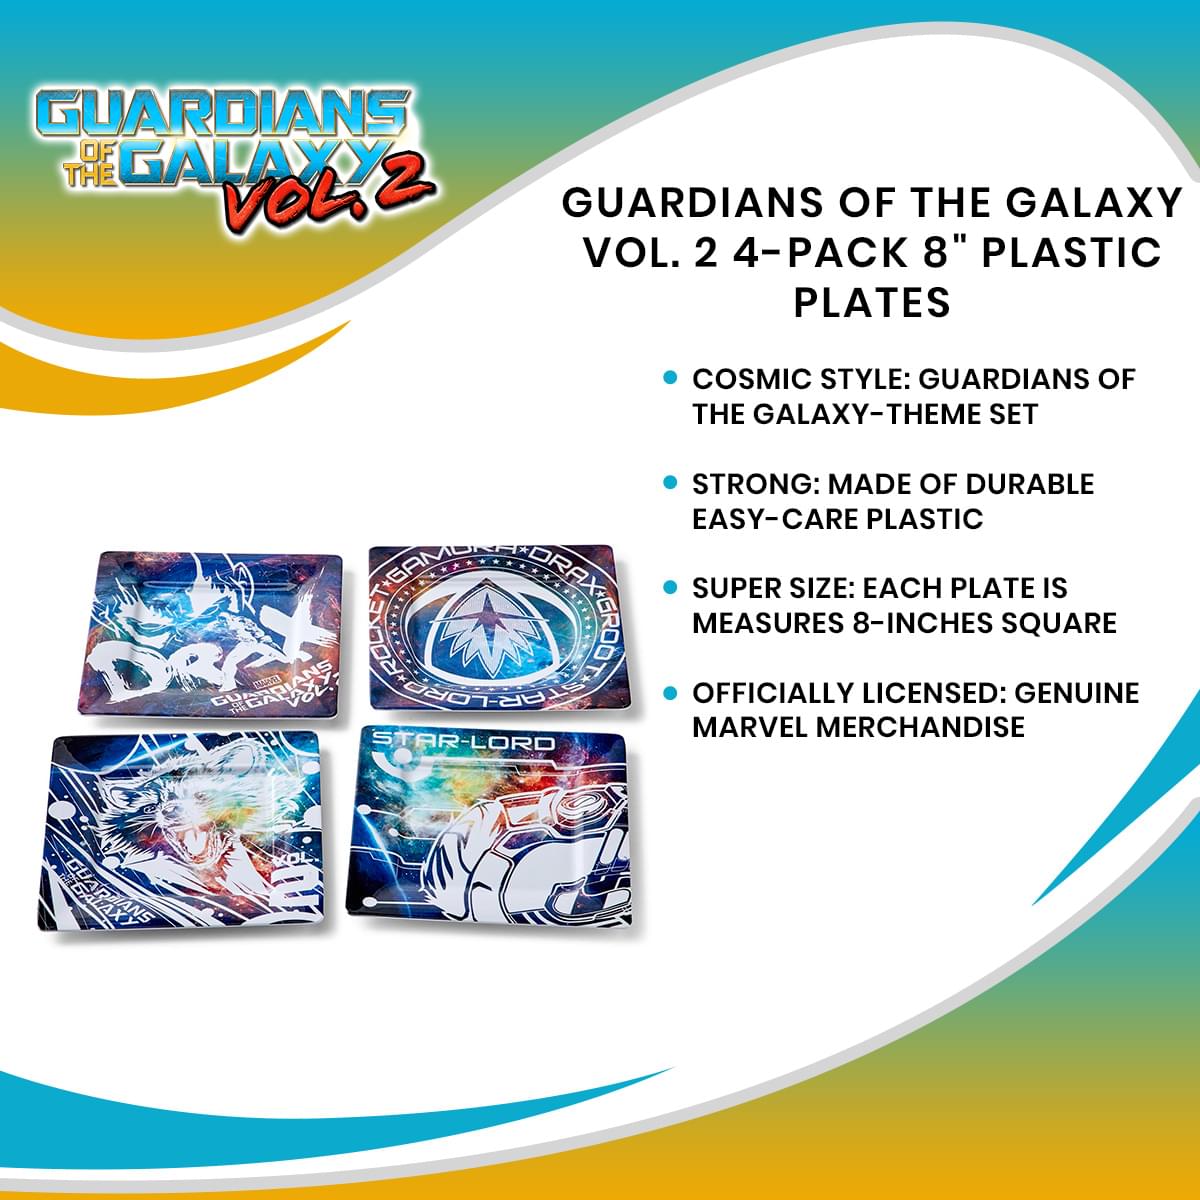 Guardians of the Galaxy Vol. 2 4-Pack 8" Plastic Plates